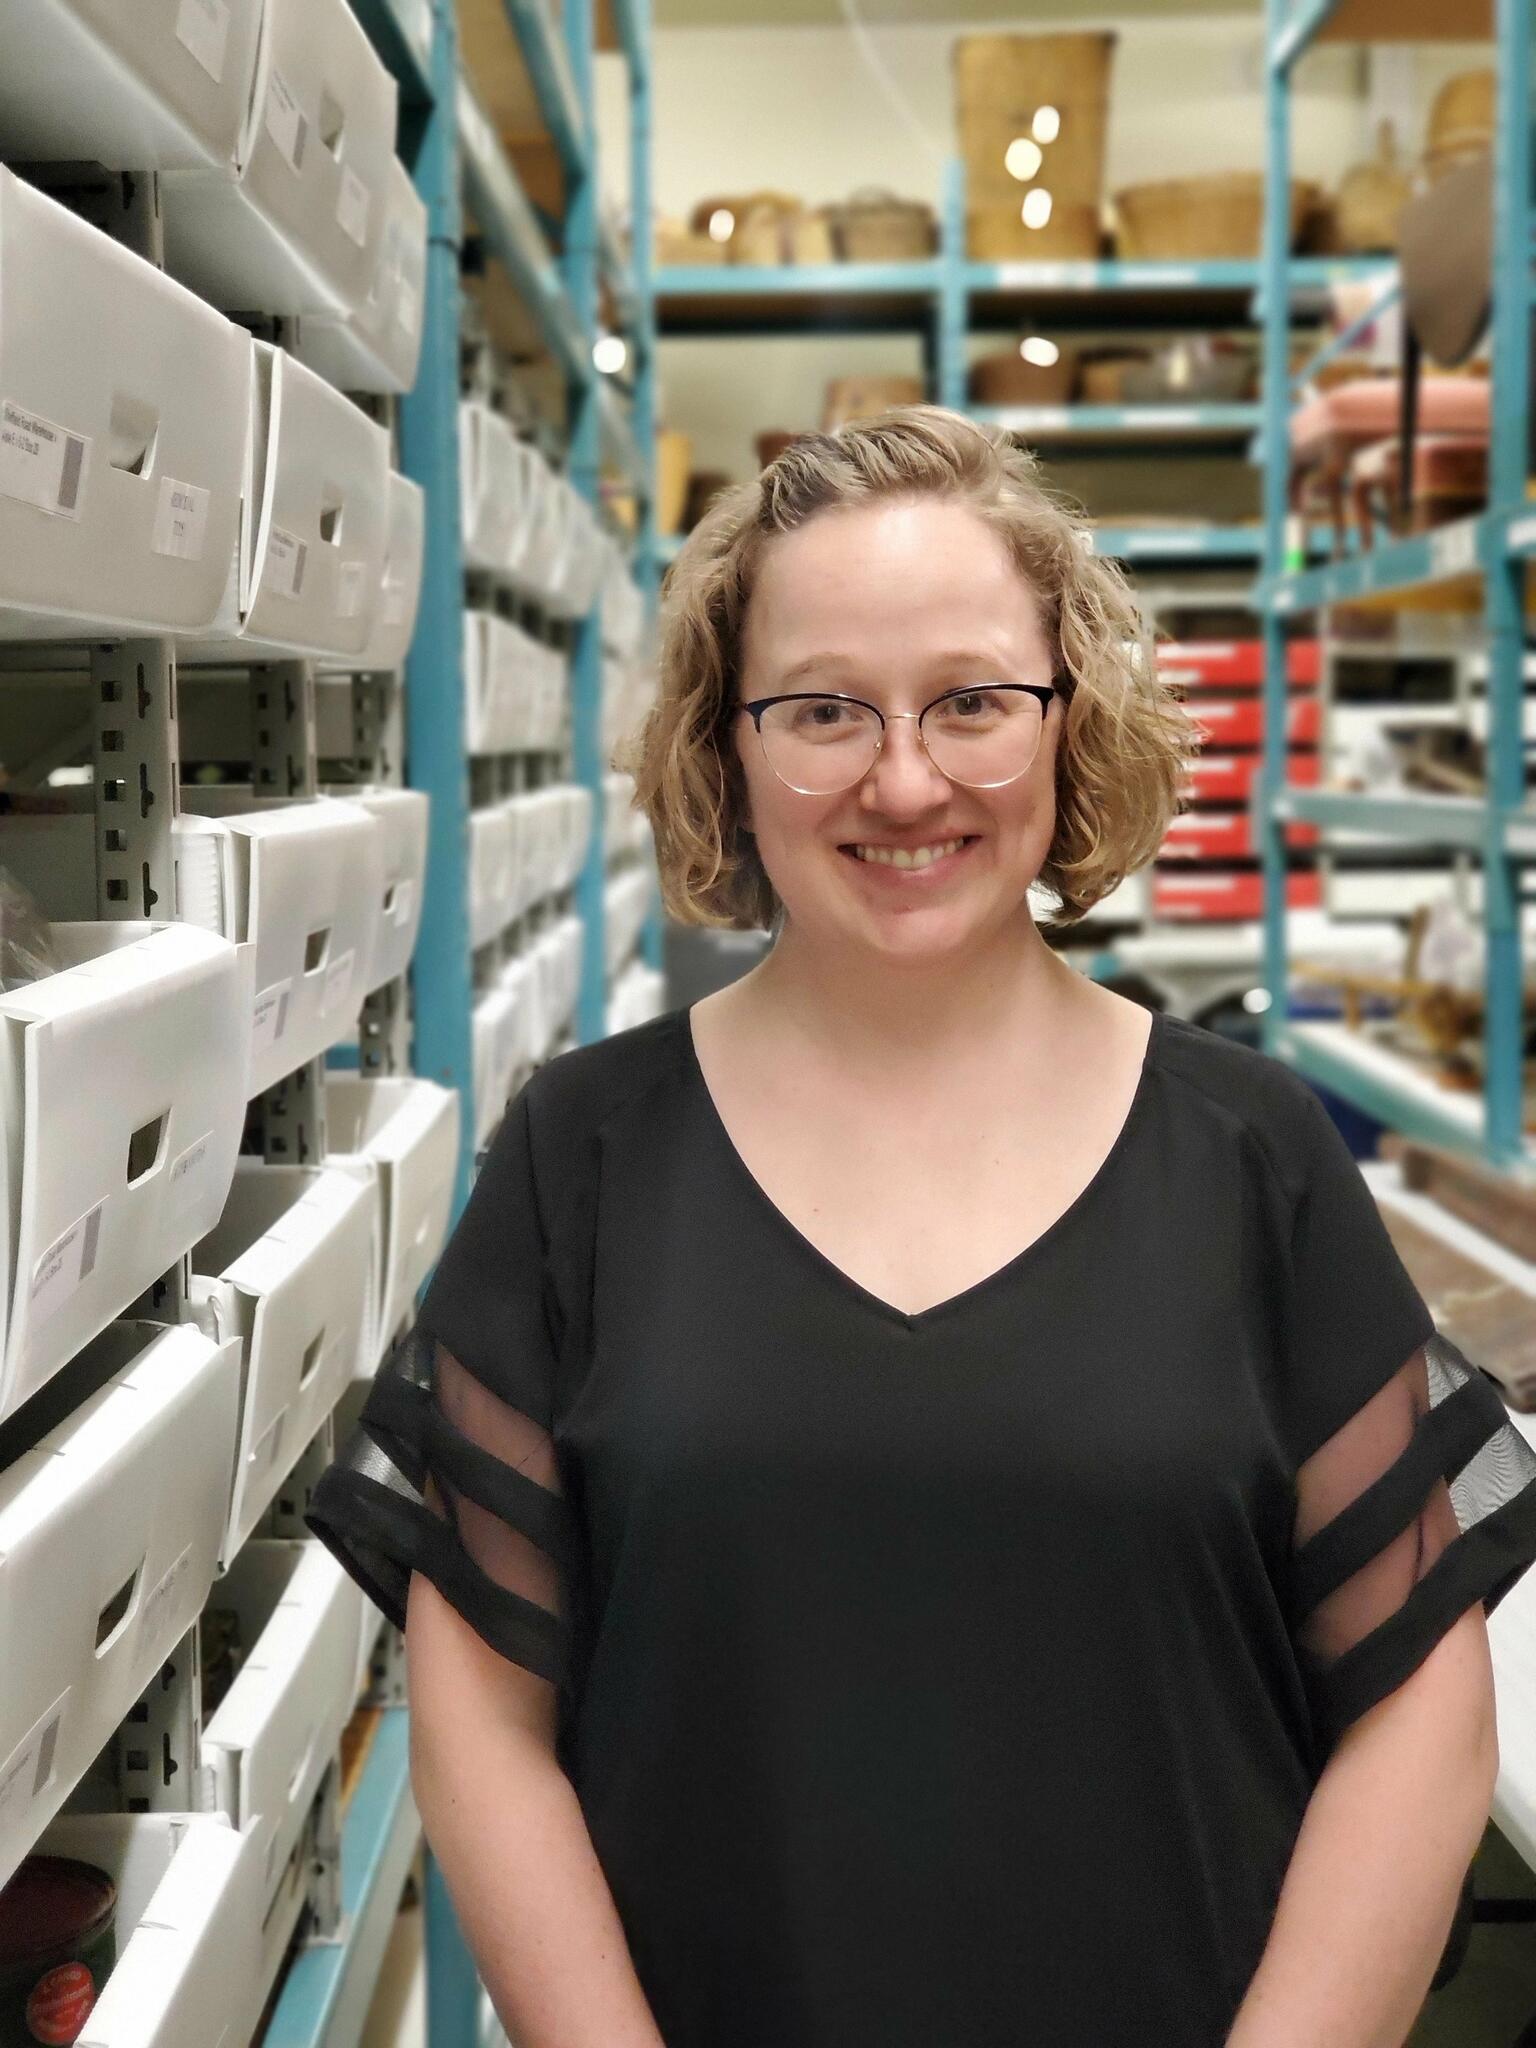 Interview with Marla Dobson, Queen's Art History Ph.D. '18